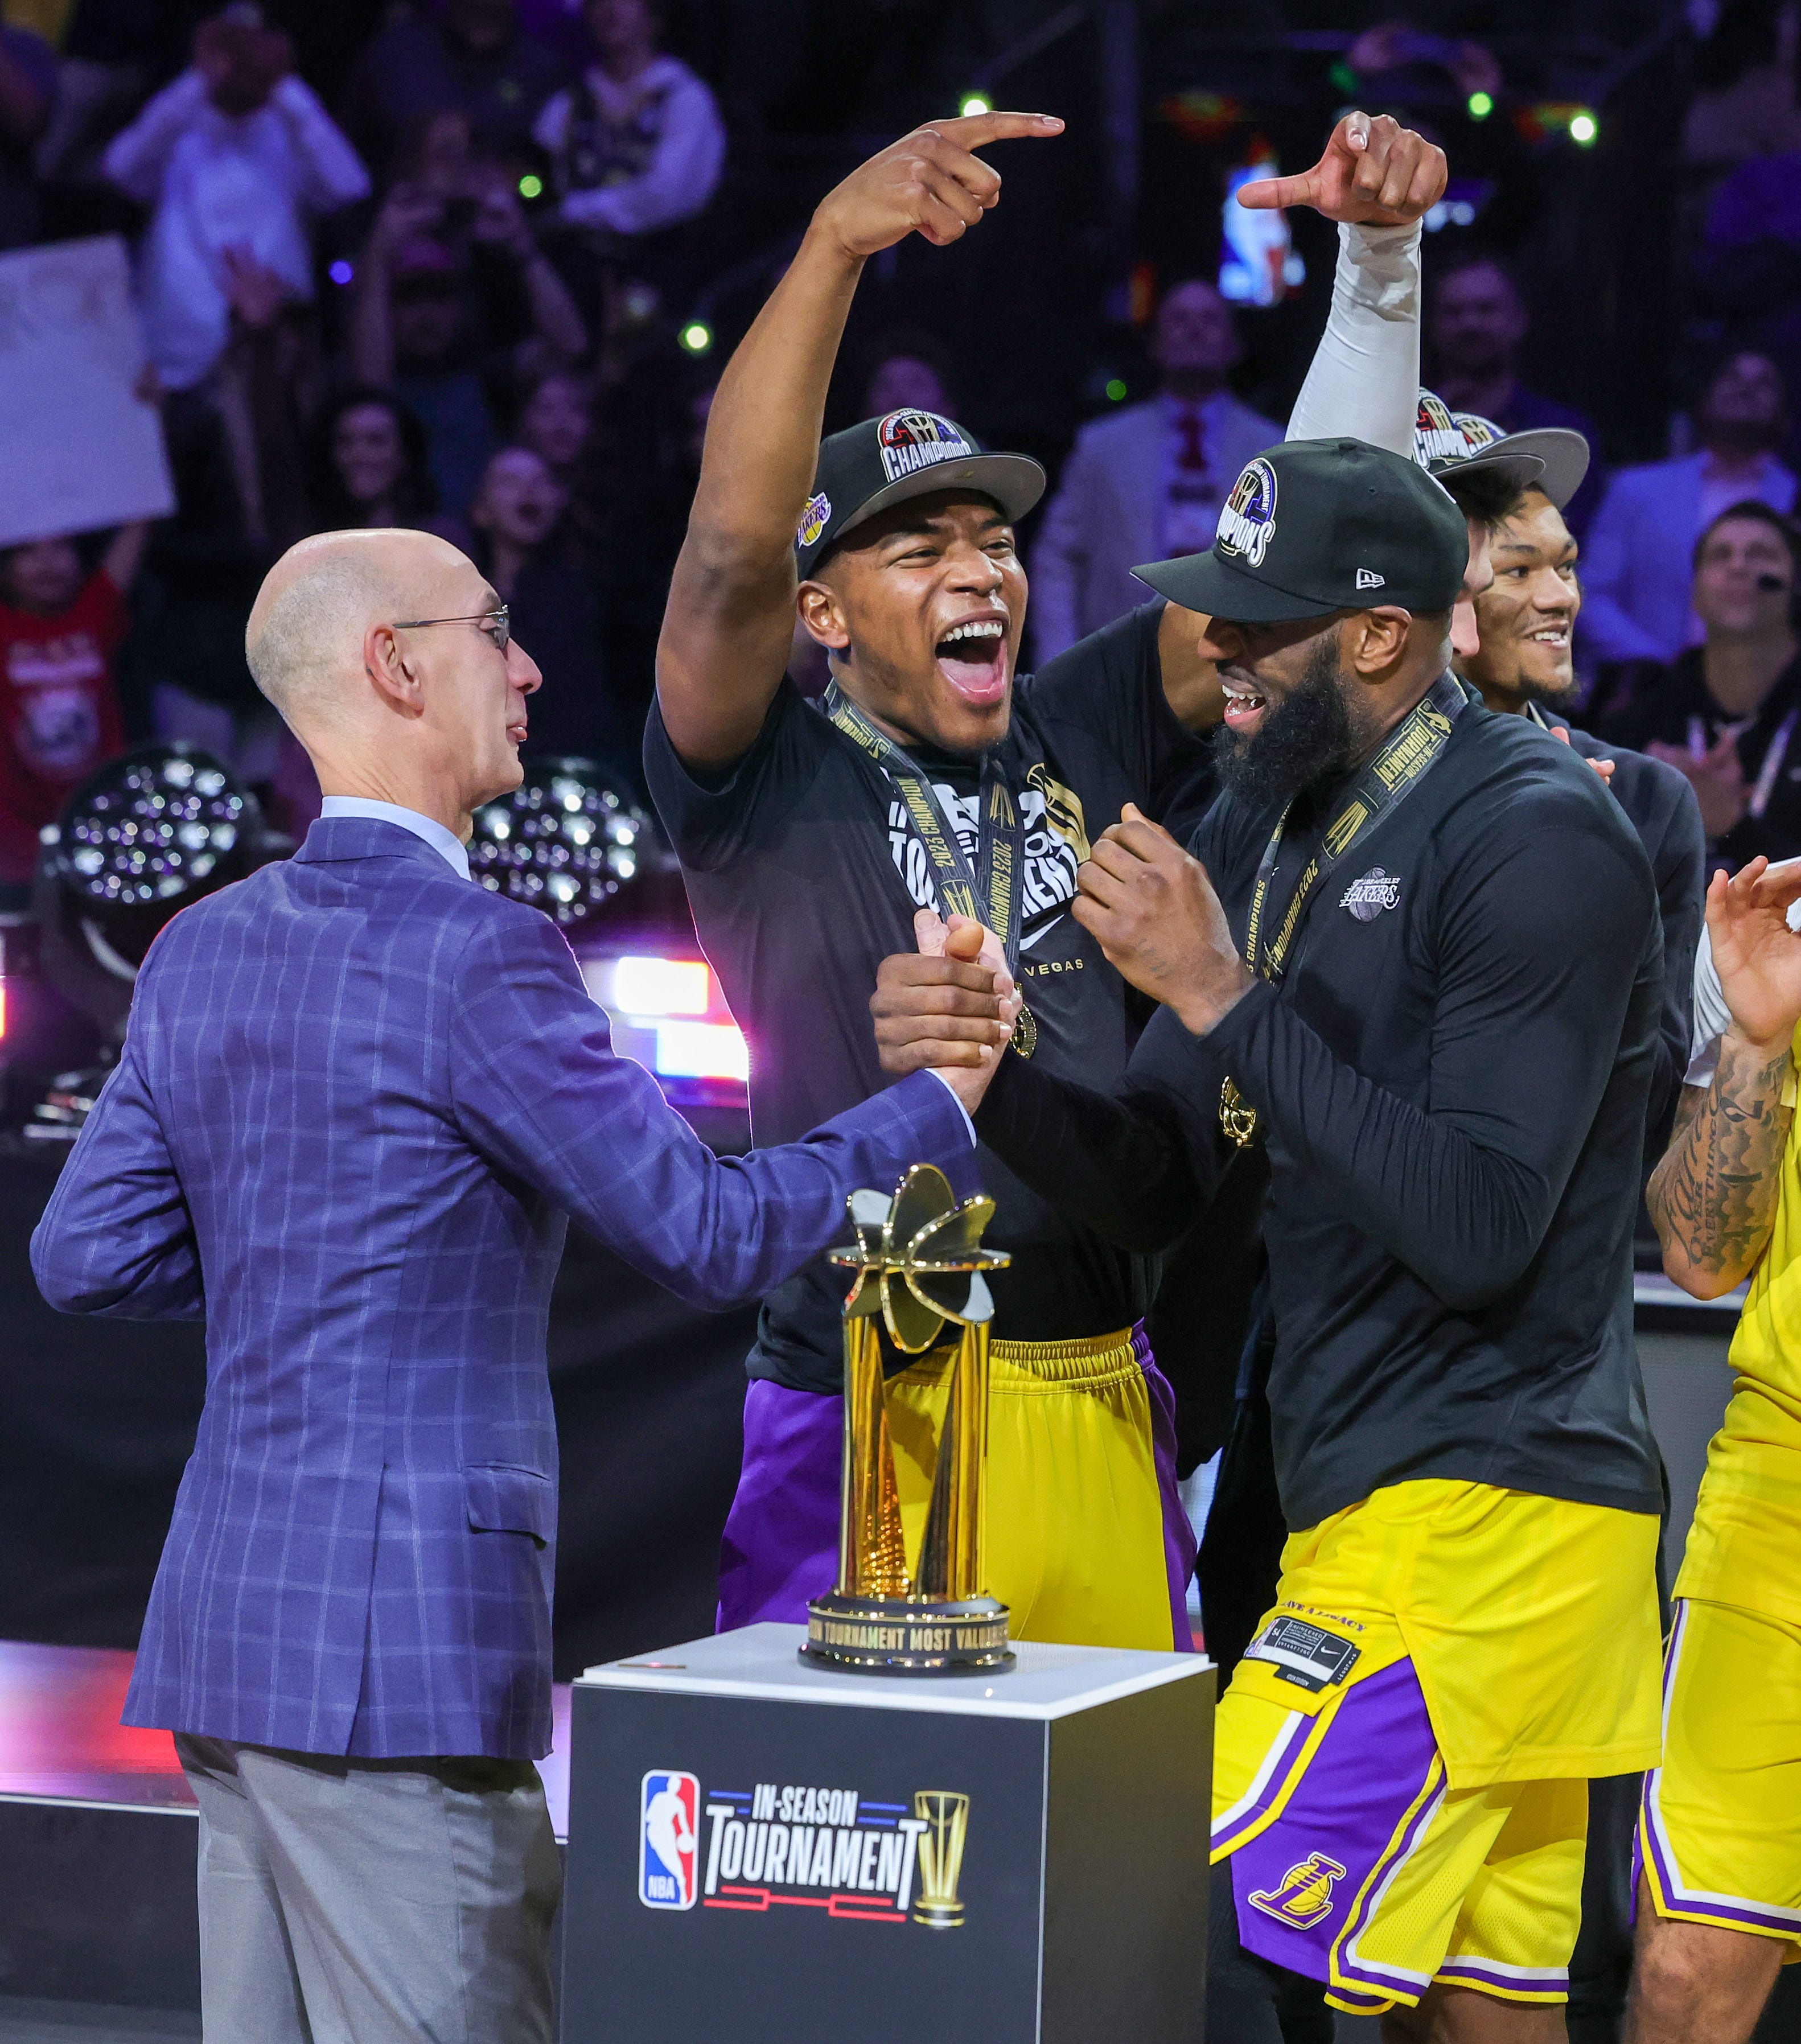 Analysis: The NBA In-Season Tournament is doing what it intended